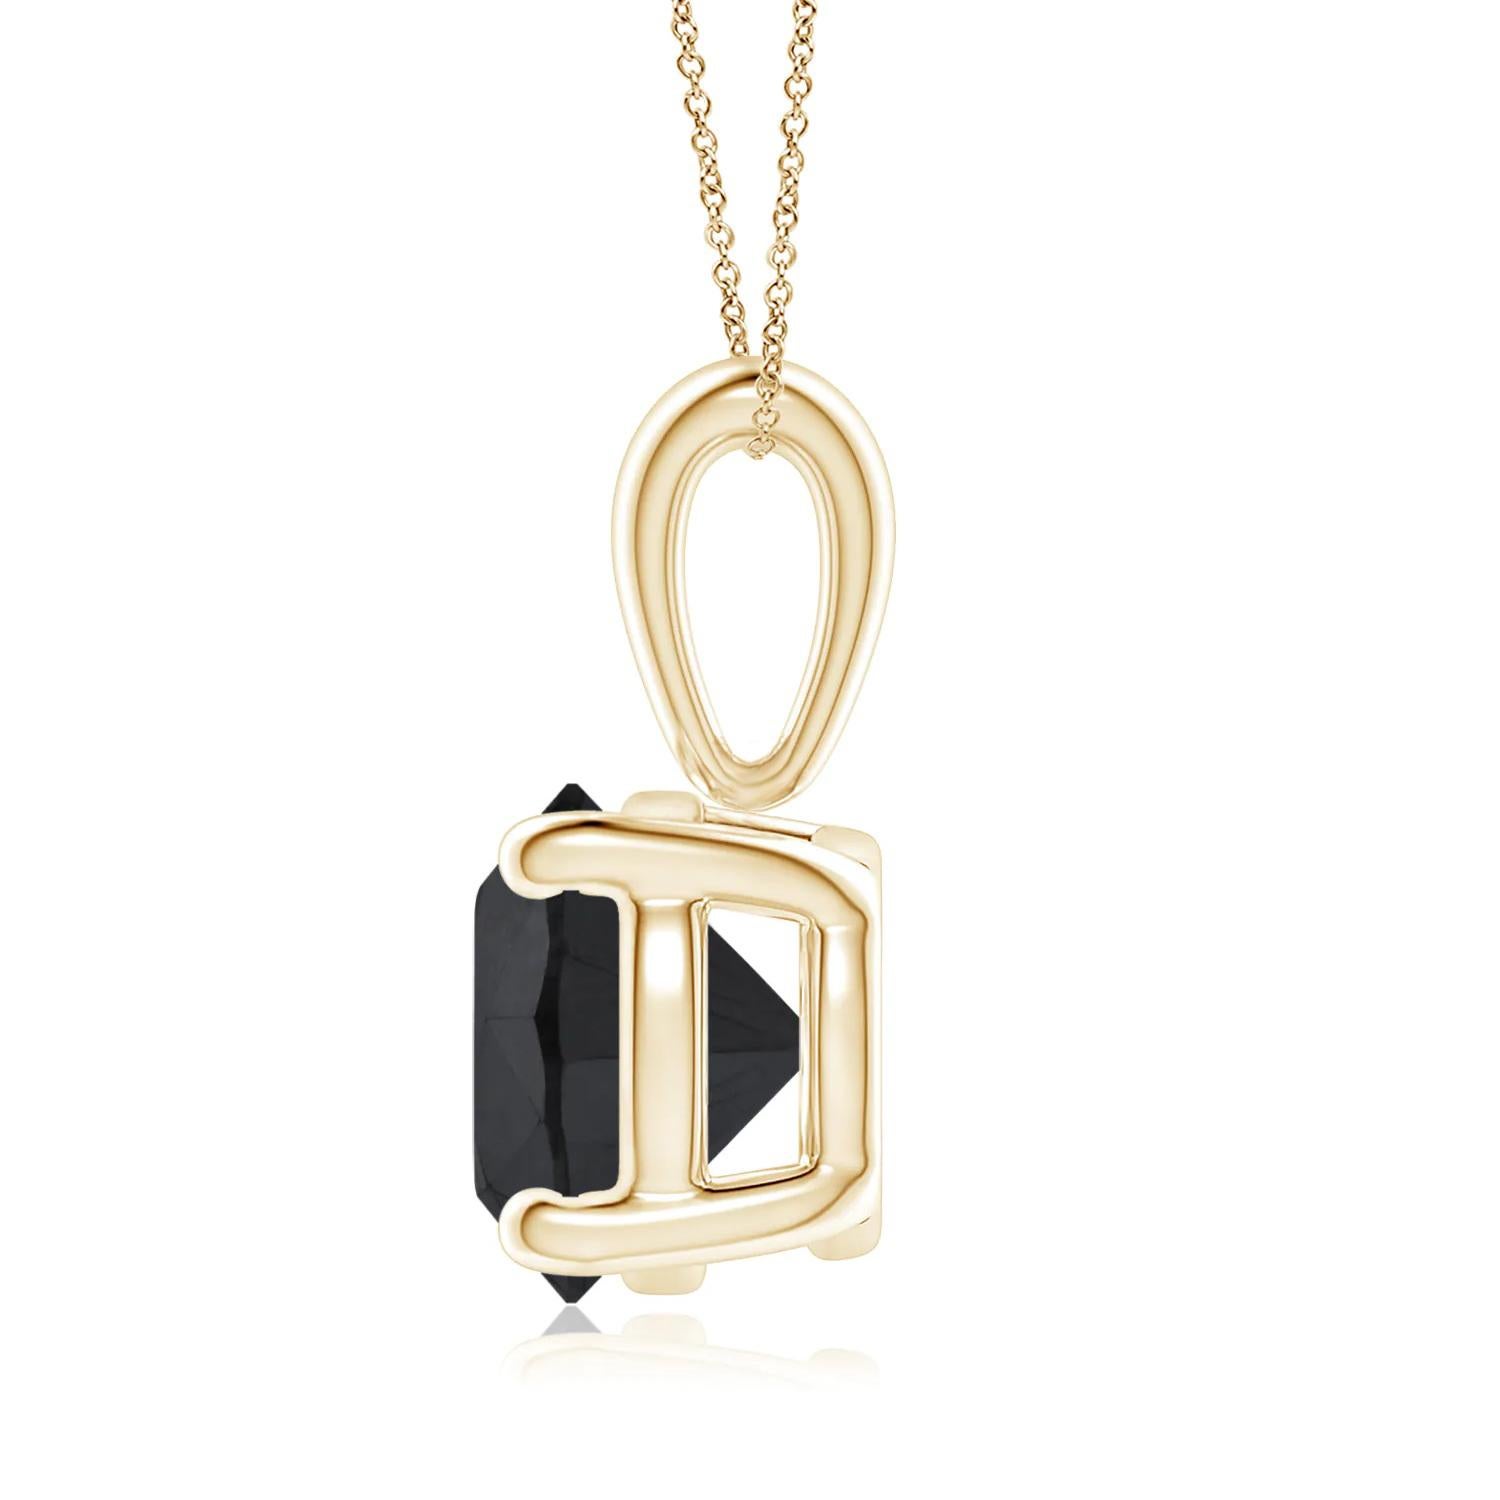 Round Cut 1.55 Carat Round Black Diamond Solitaire Pendant Necklace in 14K Yellow Gold